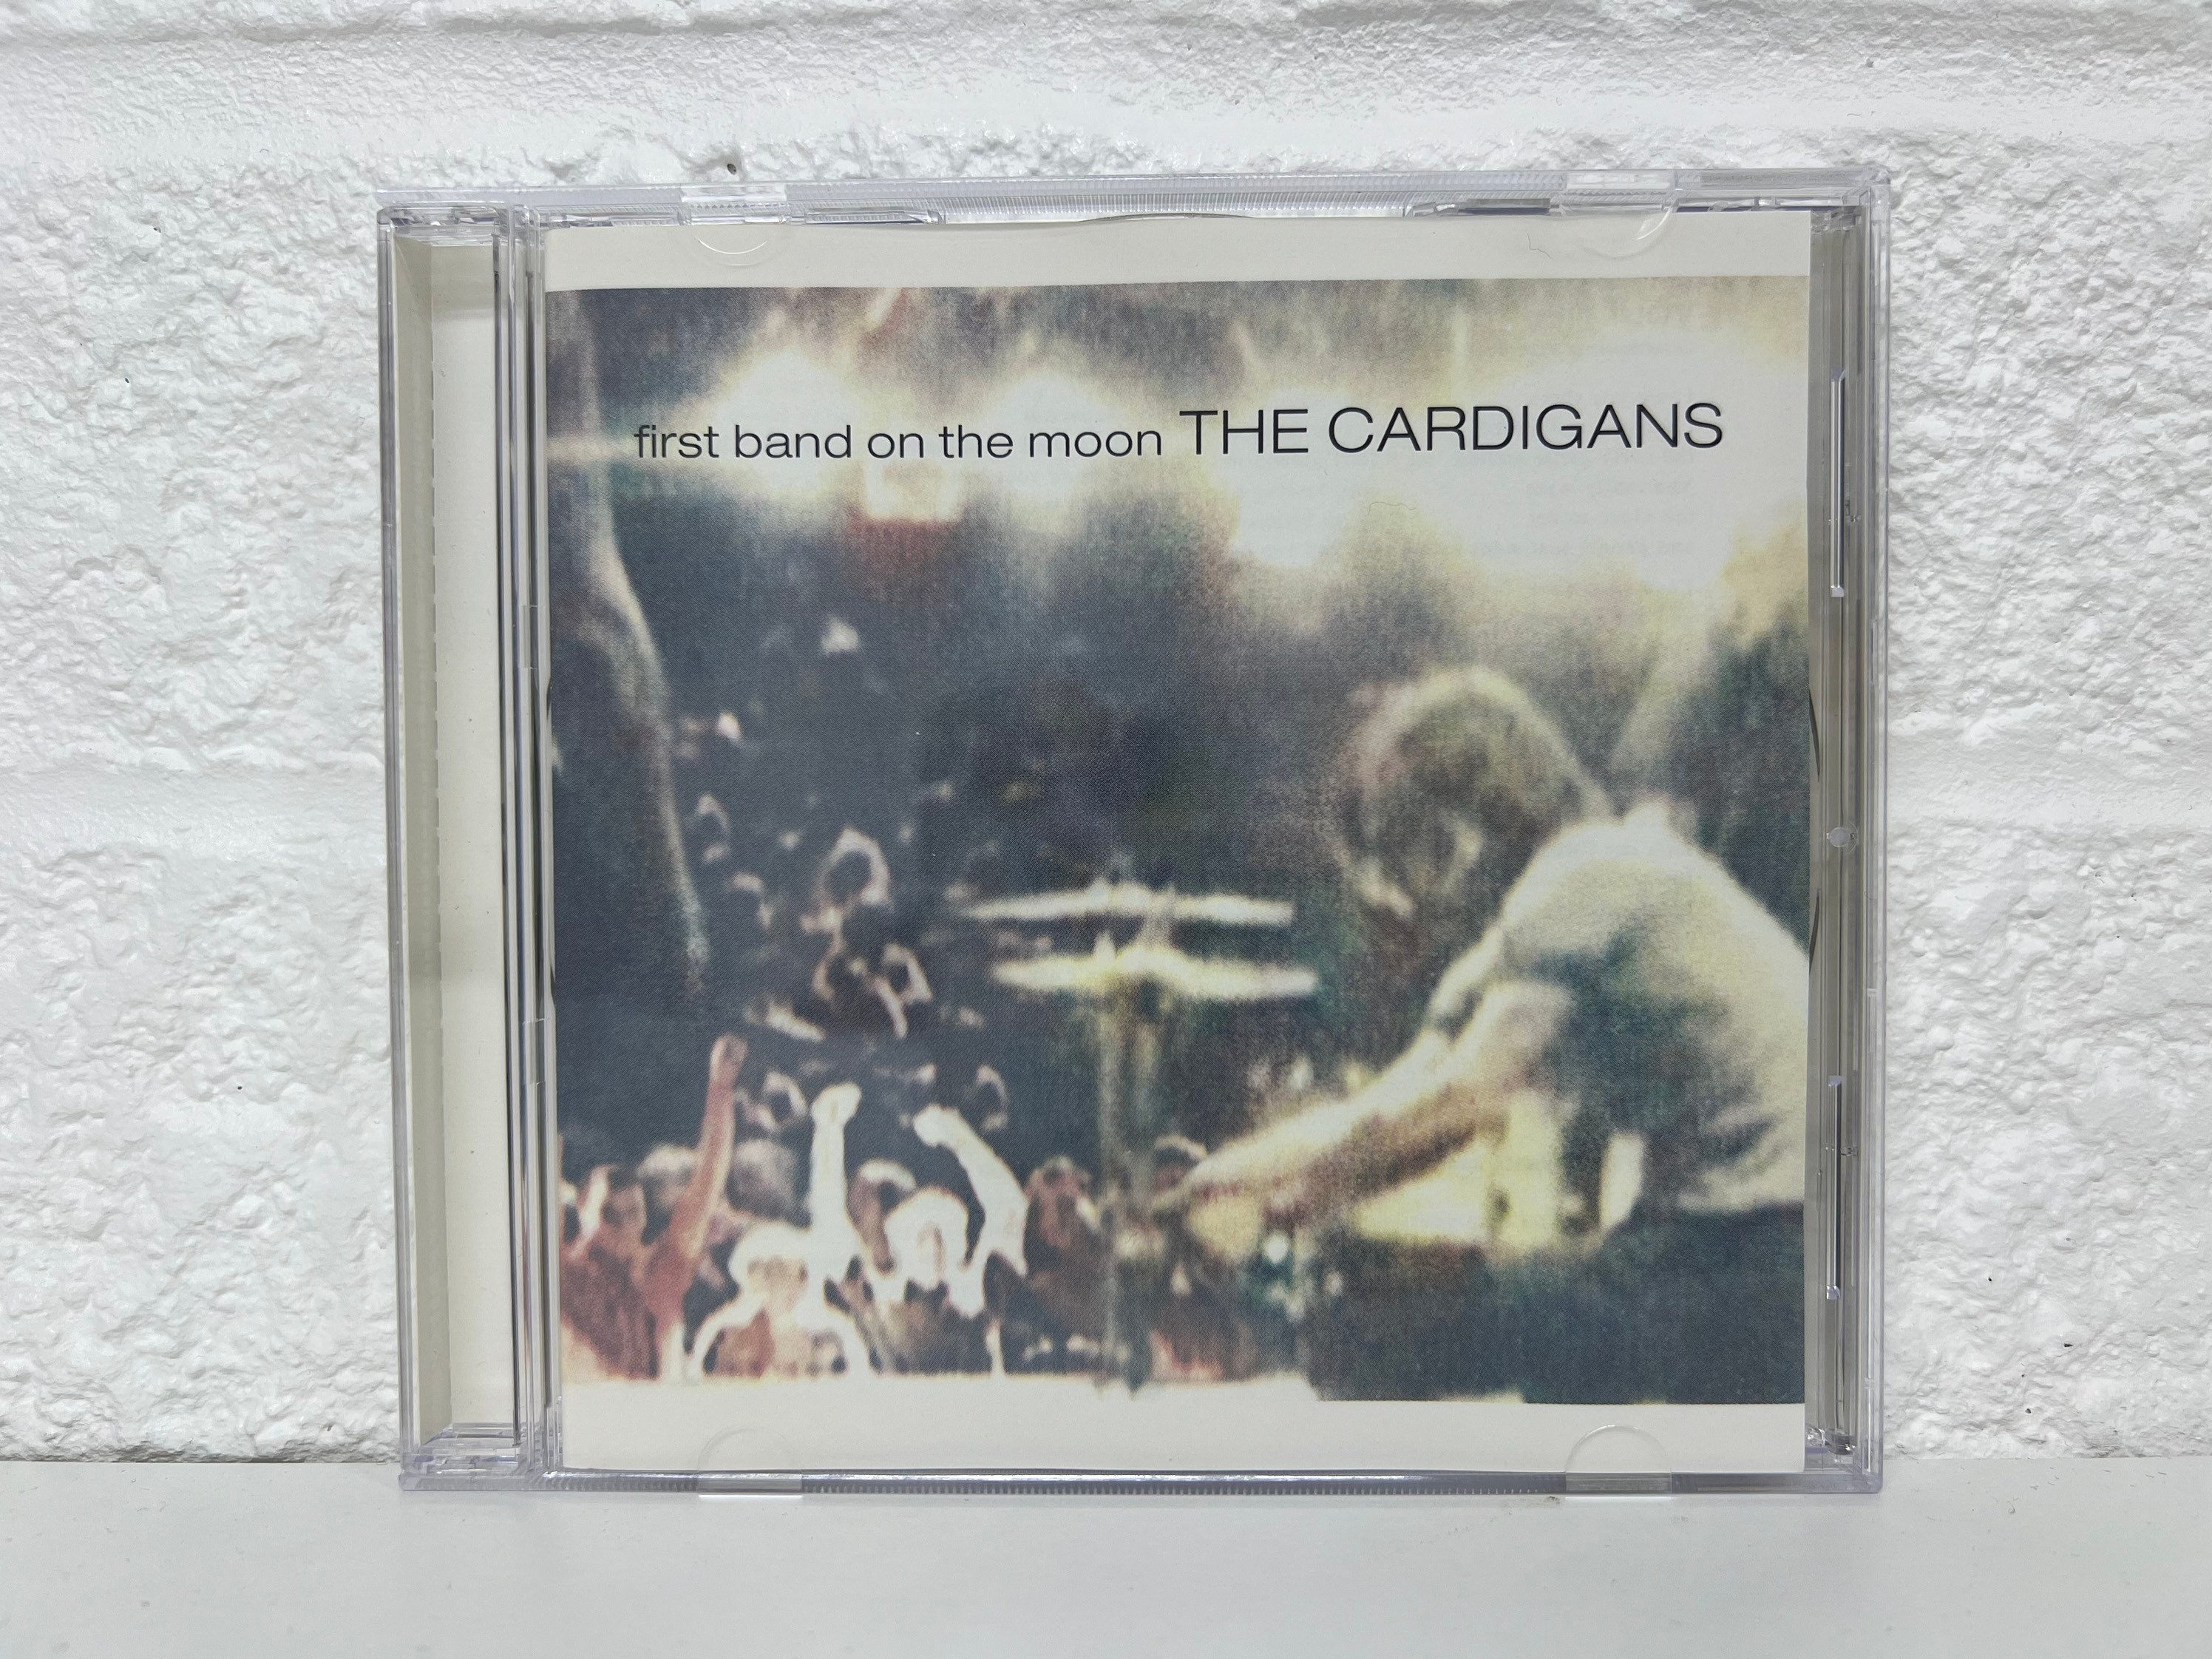 Buy The Cardigans CD Collection Album First Band on the Moon Genre Online  in India Etsy